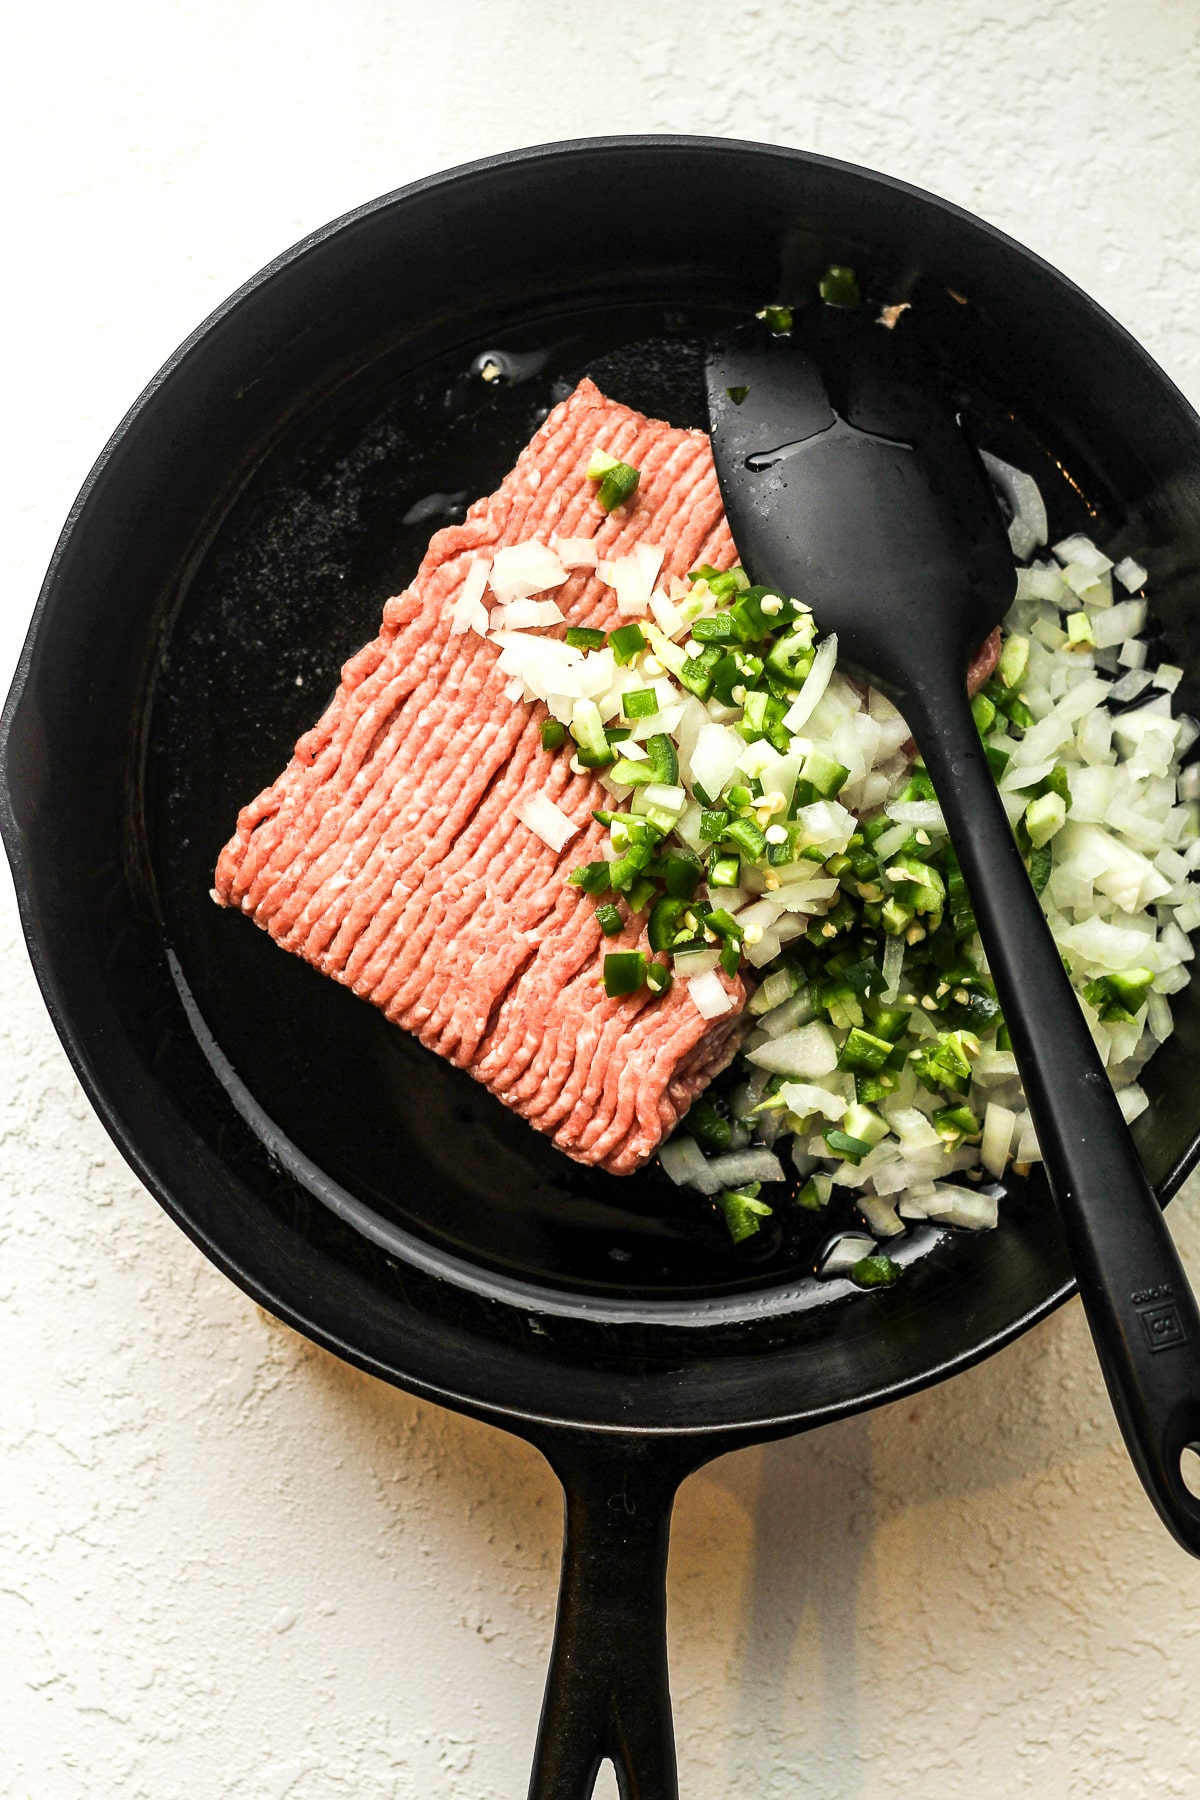 A skillet of the raw meat plus diced veggies.